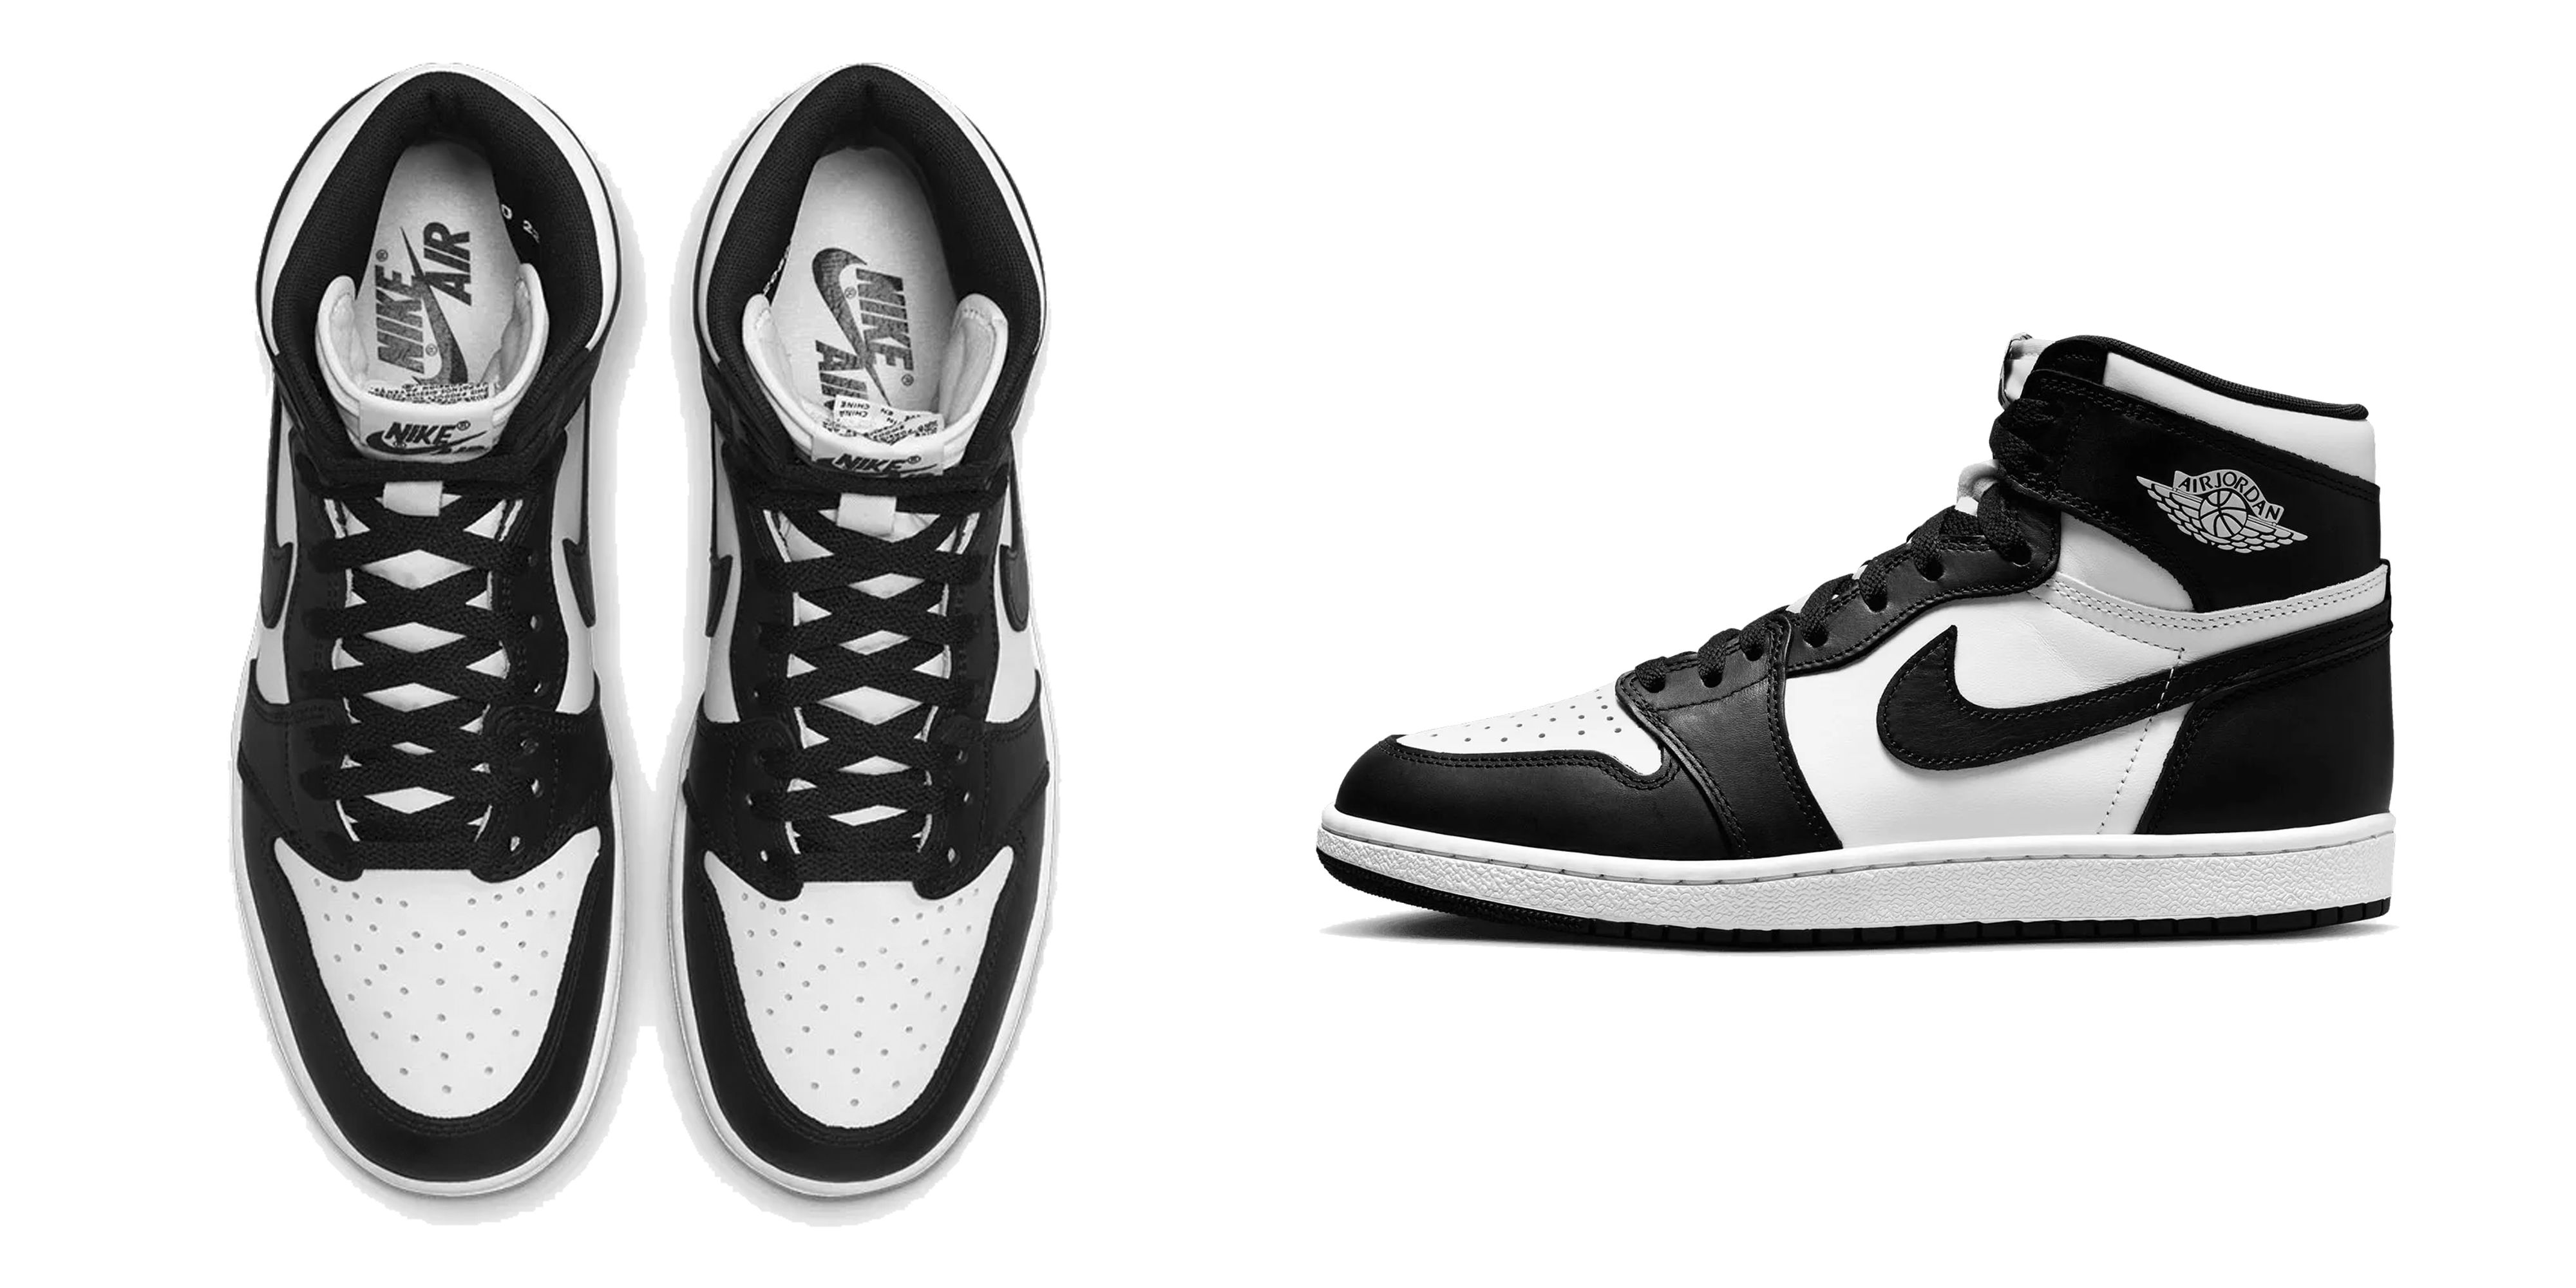 naam Verslagen geest The Air Jordan 1 High '85 'Black/White' Is About to Drop. Here's Everything  to Know